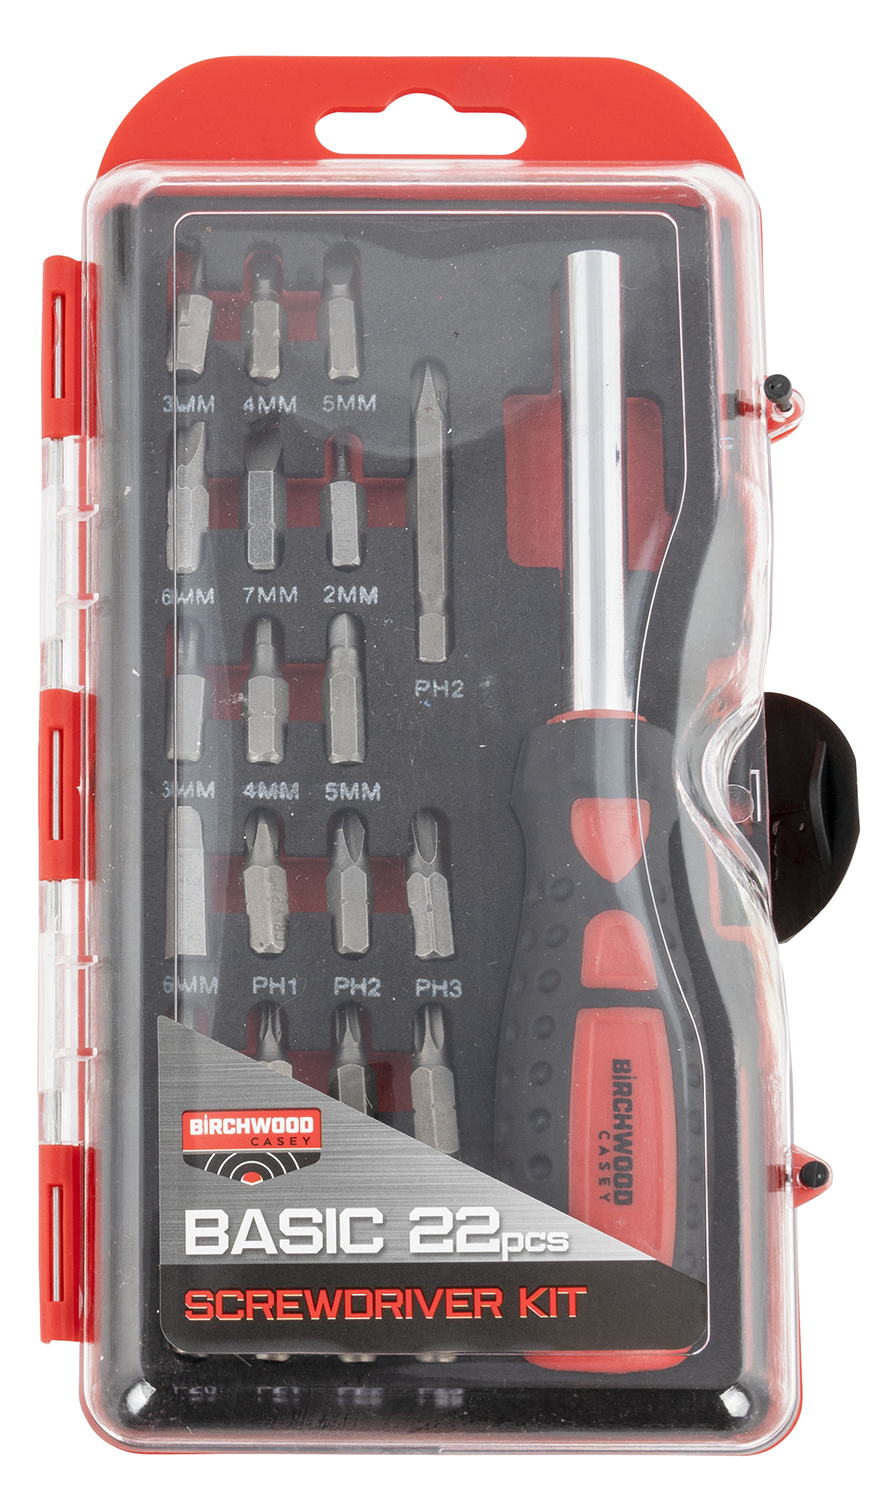 Birchwood Casey BSDS Basic Screwdriver Kit  22 Pieces Includes Slotted/Philips/Torx/Hex Heads